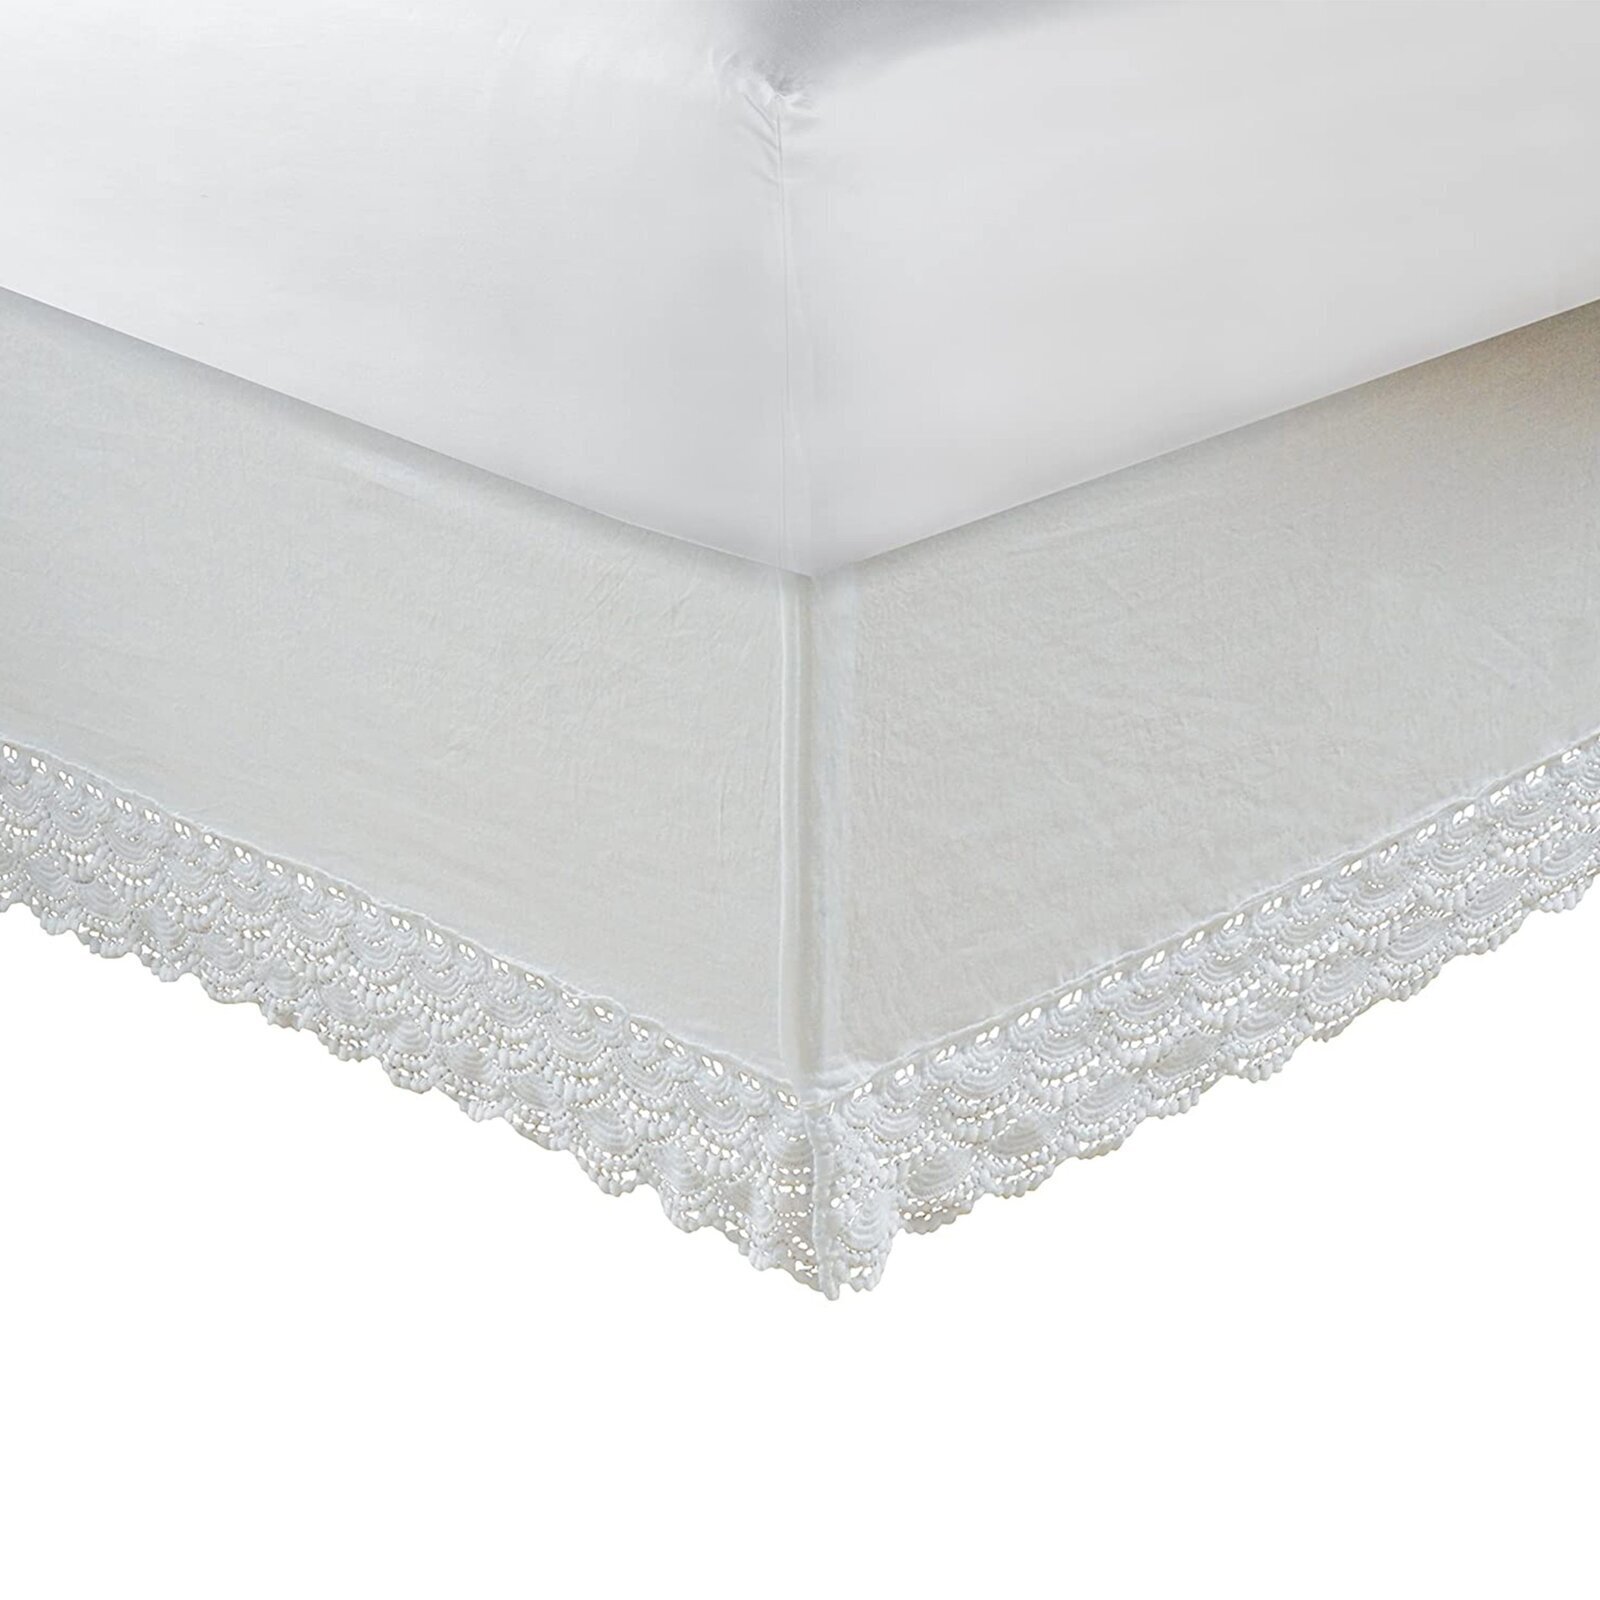 Polyester & cotton crochet lace bed skirt